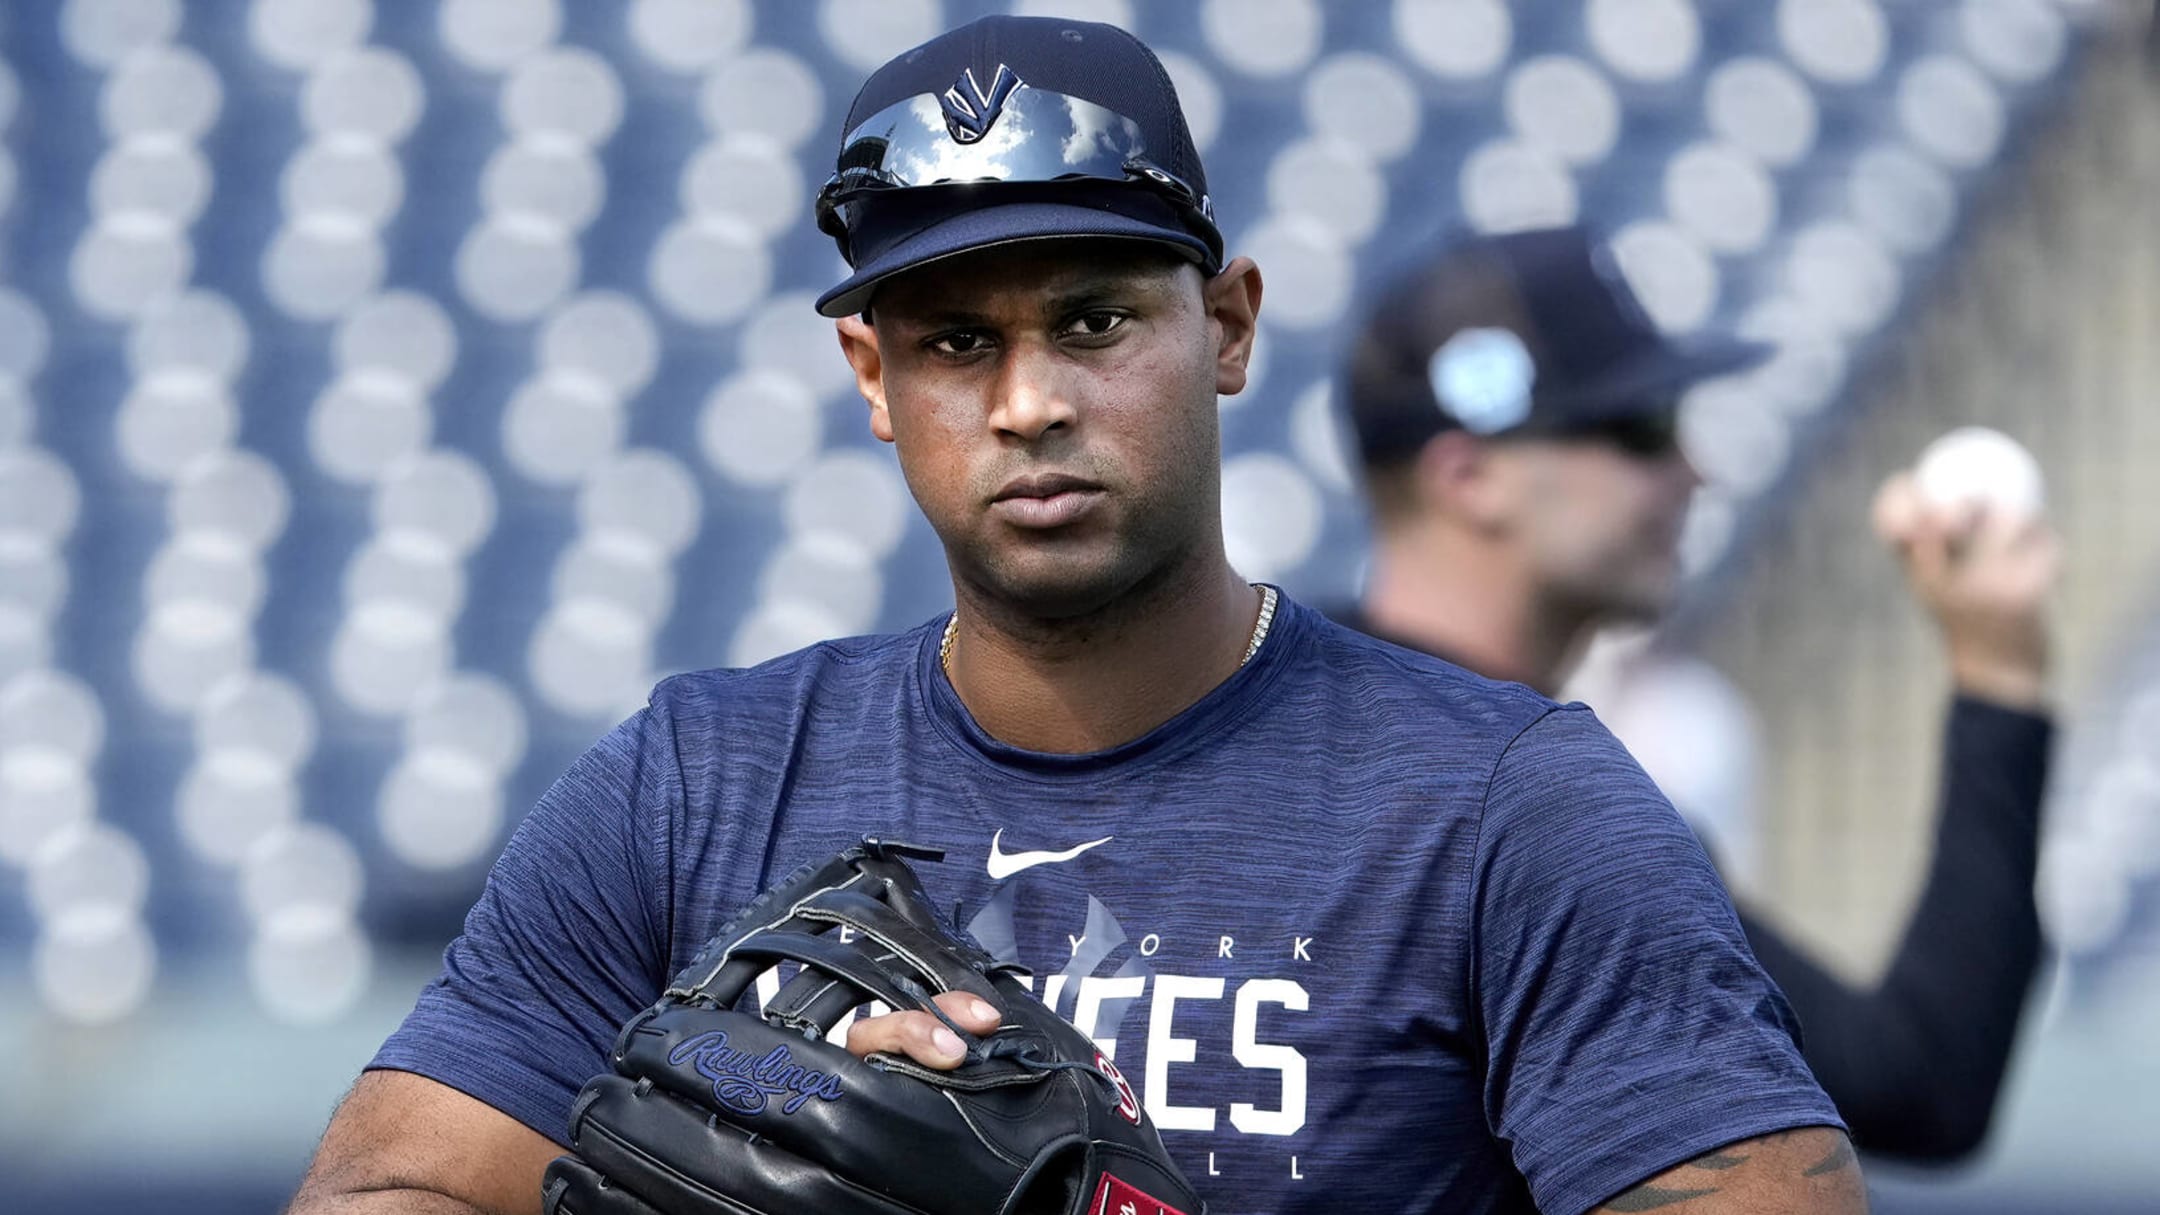 Orioles sign former NYY Aaron Hicks and place Cedric Mullins on IL (groin)